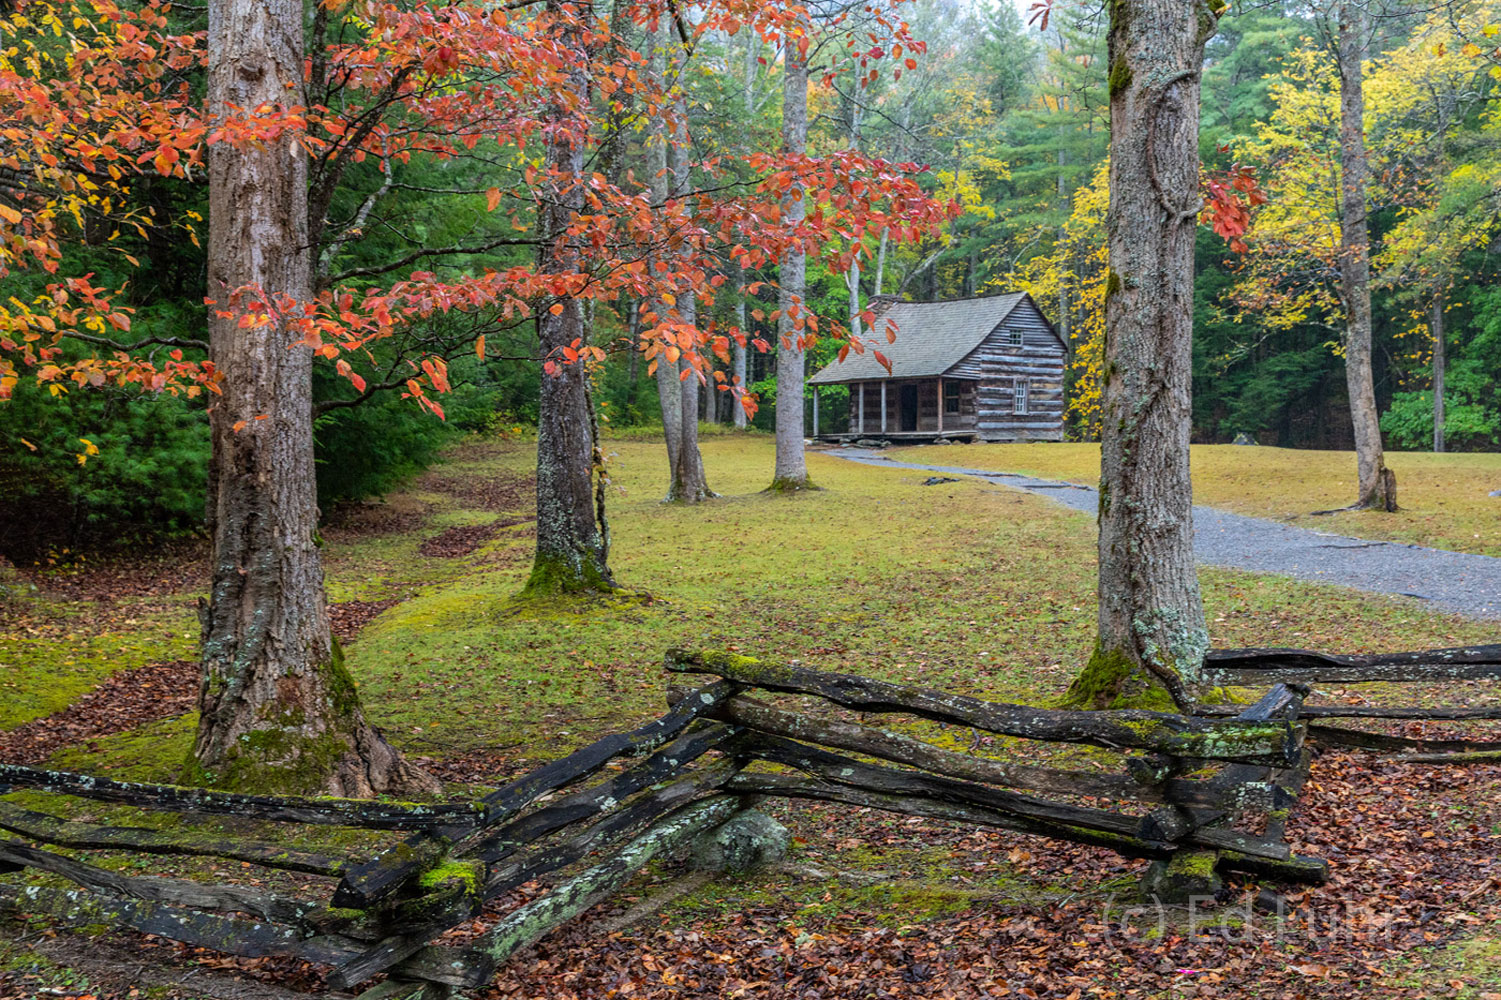 One of the most picturesque historic cabins in Cades Cove, Carter Shields is especially magnificent as its woodland setting puts...